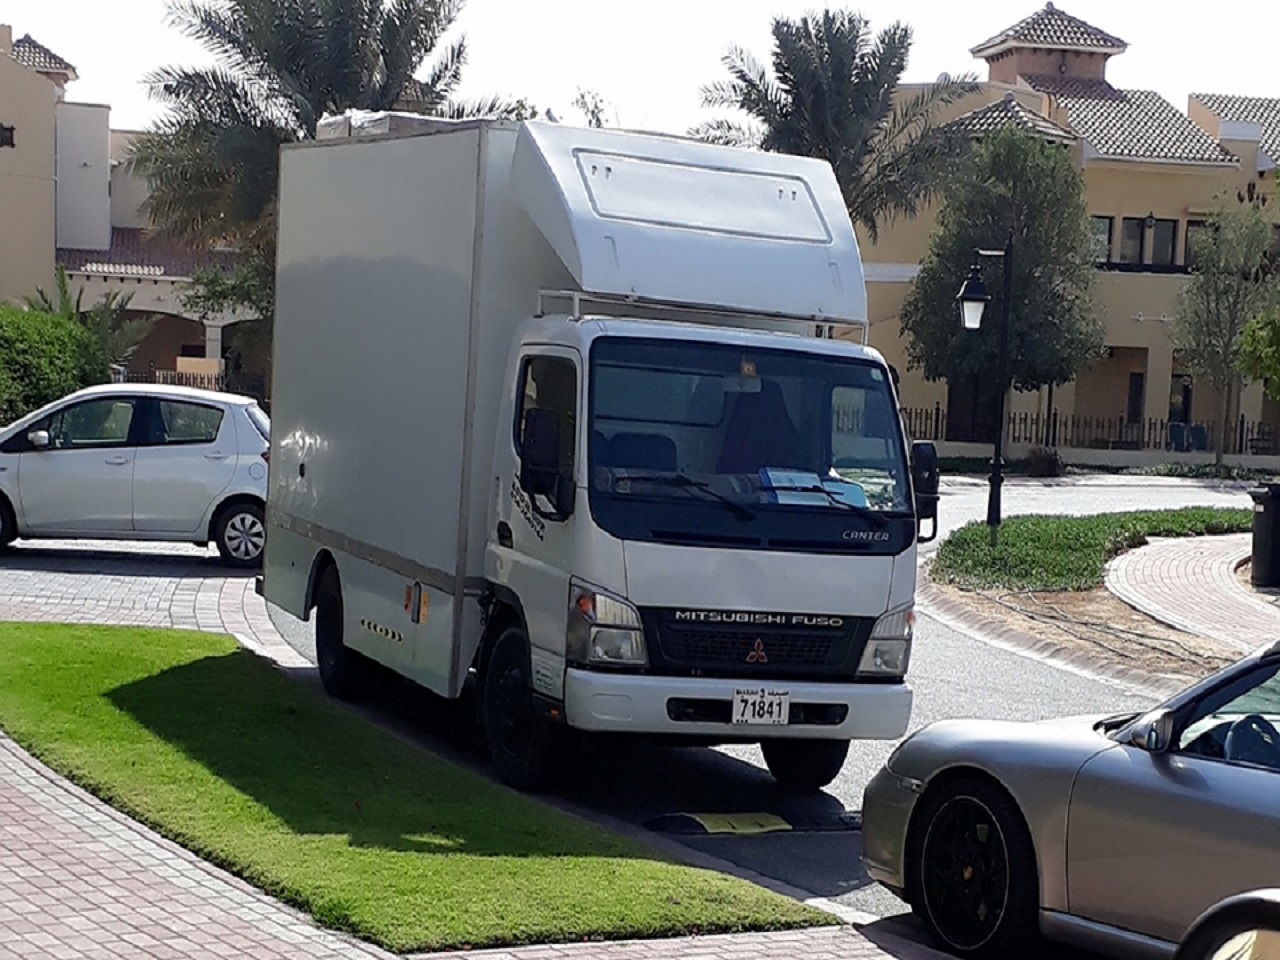 Movers in uae, Movers uae, uae movers, Movers Dubai,Movers in Dubai. local Packers uae , 
Dubai Movers, UAE Movers, Moving and Relocation in UAE, best movers in dubai, professional movers in dubai,cheap movers and packers dubai, packing and moving companies dubai, packers and movers in ajman,
long distance moving uae,  Moving and Relocation in uae, furniture movers in uae, furniture movers dubai, dubai movers & packers, best movers in abu dhabi, packers and movers in abu dhabi,
professional movers uae, office movers uae, moving company uae, furniture moving uae, abu dhabi movers, sharjah movers, best movers in sharjah, movers and packers sharjah, movers and packers in fujairah,
movers in abu dhabi, movers in UAE, movers in United Arab Emirates,best movers company uae, best movers company in UAE, safe moving in uae, movers in al ain, al ain movers, packers and movers in ras al khaimah,
movers in sharjah, movers in ajman ,movers in fujairah ,movers in ras al khaimah, movers in Umm al Quwain , movers abu dhabi,house movers in abu dhabi, house movers in UAE, movers abu dhabi price, movers and packers in Abu Dhabi, 
packers and movers in Abu Dhabi, packers and movers in UAE, Movers in al ain,
movers abu dhabi, movers uae, best movers in abu dhabi, moving companies in abu dhabi,furniture movers in abu dhabi, 
house movers in abu dhabi, international movers abu dhabi, best movers in abu dhabi, furniture movers, 
relocation companies in abu dhabi, moving car, removal companies, moving companies, cheap movers, international removals, 
relocation companies, moves, removal, 
local movers, house movers, allied moving,professional movers, home movers abu dhabi, moving quotes, international movers, 
international moving companies, 
moving house, packers and movers, shipping companies in dubai,relocation services,house moving, removal companies in abu dhabi,
Best and cheap Movers in al ain,
cheap and best Movers Abu Dhabi,
best Home Shifting in ruwais,
cheap and best Furniture movers in al ain,
cheap and best Furniture movers in ruwais,
best Office packers and movers in al ain,
best Office packers and movers in ruwais,
cheap Office packers and movers in ruwais,
best Home Shifting services in al ain,
best Movers in Ruwais,
best and cheap  Movers in al ain,
best movers ruwais,
ruwais best movers,
cheap and best movers al ain,
cheap and best movers ruwais,
best and cheap movers ruwais,
best and cheap movers al ain,
Home Shifting services in ruwais,
Office packers and movers ruwais,

Fujirah movers and packers,
Movers in fujirah,
Local movers uae,
International movers uae,
International movers Abudhabi,
International movers dubai,
International movers Al Ain,
International movers Ruwis,
house relocation company,
house relocation company Abu Dhabi,
house relocation company dubai,
house relocation company al ain,
house relocation company Ruwis,
house relocation company sharja,
house relocation company rasulkhema,
house relocation company fujirah,
house furniture relocation company,
best international movers in dubai,
best international movers in Abu Dhabi,
best international movers in al ain,
best international movers in Ruwais,
Movers and packers Abu Dhabi,
Packers and movers Abu Dhabi,
Movers and packers al ain,
Movers and packers Ruwis,
Movers and packers fujirah,
Movers and packers sharjah,
Movers and packers Ajman,
cheap movers Abu Dhabi,
top care movers Abu Dhabi,
packers and movers in al ain,
al ain house movers,
al ain professional movers packers,
movers and packers in Abu Dhabi,
professional movers Abu Dhabi,
cheap and best movers Abu Dhabi,
house movers in Abu Dhabi,
furniture movers in Abu Dhabi,
house packers and movers in Abu Dhabi,
movers and packers in dubai,
packers and movers dubai
best movers in dubai,
dubai movers company,
cheap movers and packers dubai,
furniture movers dubai,
dubai movers and packers,
packers and movers in abu dhabi,
packers and movers in dubai,
cheap movers and packers dubai,
cheap movers and packers al Ain,
cheap movers and packers sharjah,
cheap movers and packers  rasulkhema,
cheap movers and packers Ruwis,
Abu Dhabi movers company,
Ruwis movers company,
professional movers dubai,
local movers dubai,
local movers in Abu Dhabi,
local movers in Al Ain,
local movers in Ruwais,
local movers sharjah,

local movers, cheap moving companies, removal and storage companies, storage and movers in dubai, moving company local, local movers company, dubai movers services, 
local movers in dubai, apartments movers, apartment movers in dubai, dubai local movers, moving and storage companies in dubai, local movers dubai, dubailocalmovers.com, 
dubai movers, home moving companies in dubai, local moving companies, removal and storage, best local movers, movers and storage in dubai, delivery van for rent, 
best movers local, apartment moving service, dubai movers and storage, dubai movers & packers, movers and packers images, movers services, removals in dubai, 
home moving services, removal services dubai, moving company dubai cheap, commercial movers dubai, home movers company in dubai, extra space self storage dubai, 
dubai movers packers, dubai removals, storage and moving, movers packers dubai, dubai movers cheap, cheap movers, professional movers, best movers, cheap movers in dubai, 
movers company in dubai, removal services in dubai, storage dubai cheap, cheap moving companies in dubai, moving service in dubai, house moving companies in dubai, 
dubai removal companies, moving services in dubai, move and packers, small truck movers, removal companies dubai, moving service dubai, removal company dubai, 
dubai moving service, move it transport company, movers company dubai, dubizzle movers, mover dubai, best local moving companies, moving services dubai, 
cheap moving services, dubai movers company, packing and moving companies in dubai, furniture movers in dubai, boxes for delivery, dubai moving services, 
movers dubai cheap, packing and moving companies dubai, delivery van for rent in dubai, removals dubai, movers moving, moving movers, dubai mover, best local movers in dubai, 
cheap movers and packers dubai, cheap moving company in dubai, dubai removal company, movers in dubai, packing and storage companies, cheap movers and packers, extra space dubai, 
best moving companies, movers and packers dubai moving, removal companies in dubai, movers and packers dubai, home movers in dubai, moving companies in dubai, 
packing and movers in dubai, moving and storage dubai, move box packers & movers, removals companies in dubai, mover in dubai, cheap packers and movers in dubai, 
cheap movers dubai, moving company in dubai, delivery van rental dubai, mover and packers dubai, movers and packers in dubai, dubai moving, home moving companies, 
moving company dubai, dubai movers and packers, dubai move, mover company in dubai, moving companies in in, best home movers dubai, removalists dubai, move dubai, 
dubai moving company, movers dubai, movers packers in dubai, professional movers and packers dubai, best dubai movers, home movers dubai, movers dubai dubizzle, 
move in dubai, moving companies dubai, moving dubai, mover and packers in dubai, best storage companies in dubai, commercial storage dubai, affordable movers in dubai, 
dubai moving companies, best mover dubai, best relocation companies dubai, best movers in dubai, moving companies uae, vehicle storage dubai, house movers in dubai, 
best moving company dubai, moving and packing companies, home moving company, best moving company in dubai, best movers and packers in dubai, dubai packers and movers, 
junk removal dubai, moving in dubai, best movers dubai, moving companies in dubai uae, packers and movers in dubai, delivery van, best moving companies in dubai, 
professional movers in dubai, movers companies in dubai, office movers in dubai, the best moving company in dubai, packers movers dubai, storage companies dubai, 
professional moving services, movers and packers, best relocation companies in dubai, house movers dubai, moving companies, good moving company in dubai, top movers dubai, 
professional moving companies in dubai, mover company, movers for cheap, best movers uae, moving and packing dubai, moving and storage, move and pack dubai, 
best movers and packers, best international moving companies, best international movers dubai, moving services, companies movers, professional movers and packers in dubai, 
cheap vans rental, packers in dubai, cargo van rentals, dubai storage companies, moving companies in uae, cheap storage dubai, professional home movers in dubai, 
moving and packing, commercial movers, dubai storage company, storage companies in dubai, storage services dubai, professional mover dubai, best movers in uae, 
professional movers dubai, storage company in dubai, storage dubai, best packers and movers in dubai, movers and pakers, storage company dubai, packer and movers in dubai, 
international relocation companies in dubai, best international movers in dubai, 3 ton pickup for rent in dubai, office movers dubai, packers and movers dubai, 
international relocation companies dubai, professional moving company, fit movers dubai, best movers in abu dhabi, international removals dubai, 
international moving companies dubai, storage services in dubai, international movers and packers in dubai, office relocation dubai, dubai relocation company, 
furniture storage dubai, storage in dubai, dubai local transport, dubai storage space, dubai truck rental, pick up truck rental dubai, furniture storage in dubai, 
dubai self storage, home movers, packing boxes dubai, home movers abu dhabi, self storage dubai, movers packers, storage space dubai, international moving companies in dubai, 
movers uae, storage facilities dubai, storage companies, self storage in dubai, international relocation dubai, business storage in dubai, moving from us to dubai, movers in uae, 
movers in abu dhabi, relocations companies in dubai, storage space in dubai, packing companies in dubai, international packers and movers in dubai, trucking companies in dubai, 
pickup truck rental dubai, movers and packers in ajman, international packers and movers dubai, storage facilities in dubai, international movers dubai, moving company, 
international movers in dubai, pick up rental dubai, Moving & Packing, moving company abu dhabi, dubai relocation companies, abu dhabi movers, storage space for rent in dubai, 
relocation companies dubai, best self storage companies, emirates movers, relocation companies in dubai, packers & movers in dubai, international movers, 
short term storage dubai, villa relocation dubai, movers dubai price, relocation dubai,, 